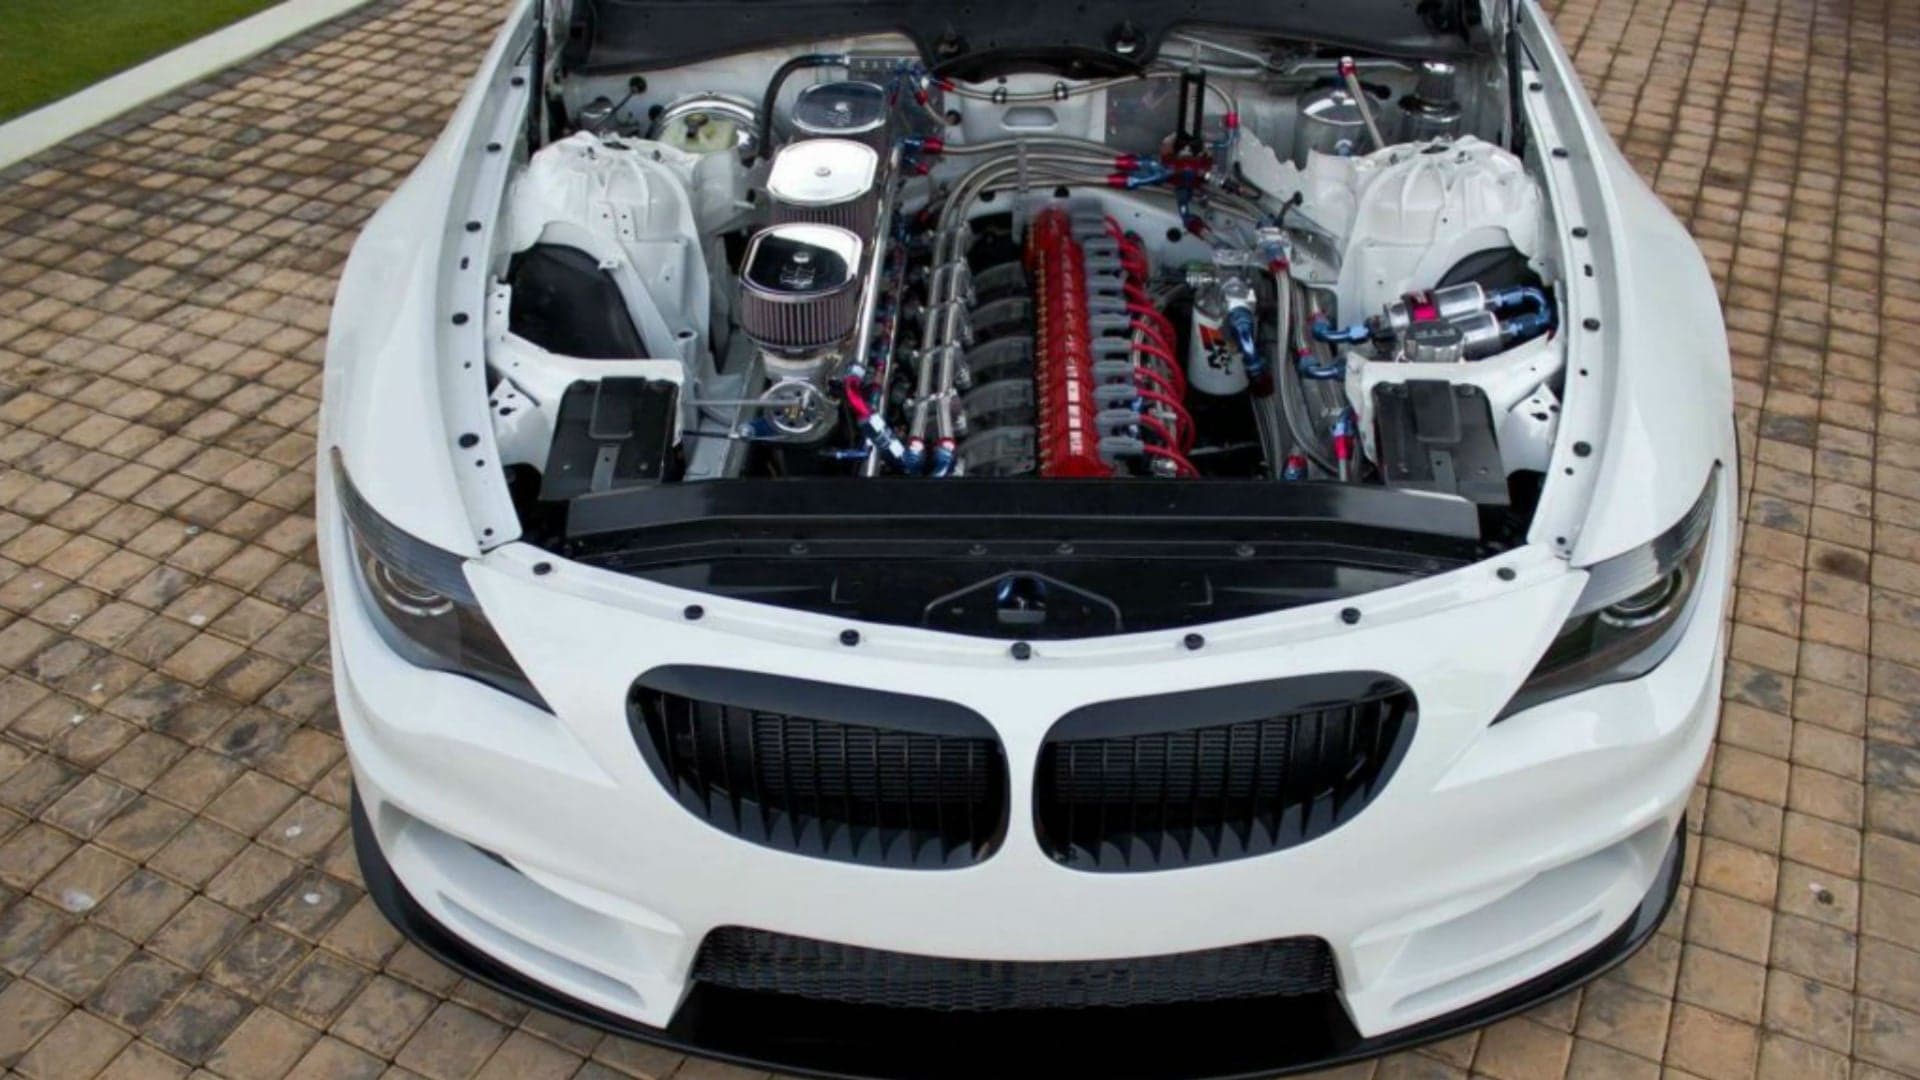 There’s an Insane BMW M6 With a 6-Rotor Engine Up for Sale in South Africa